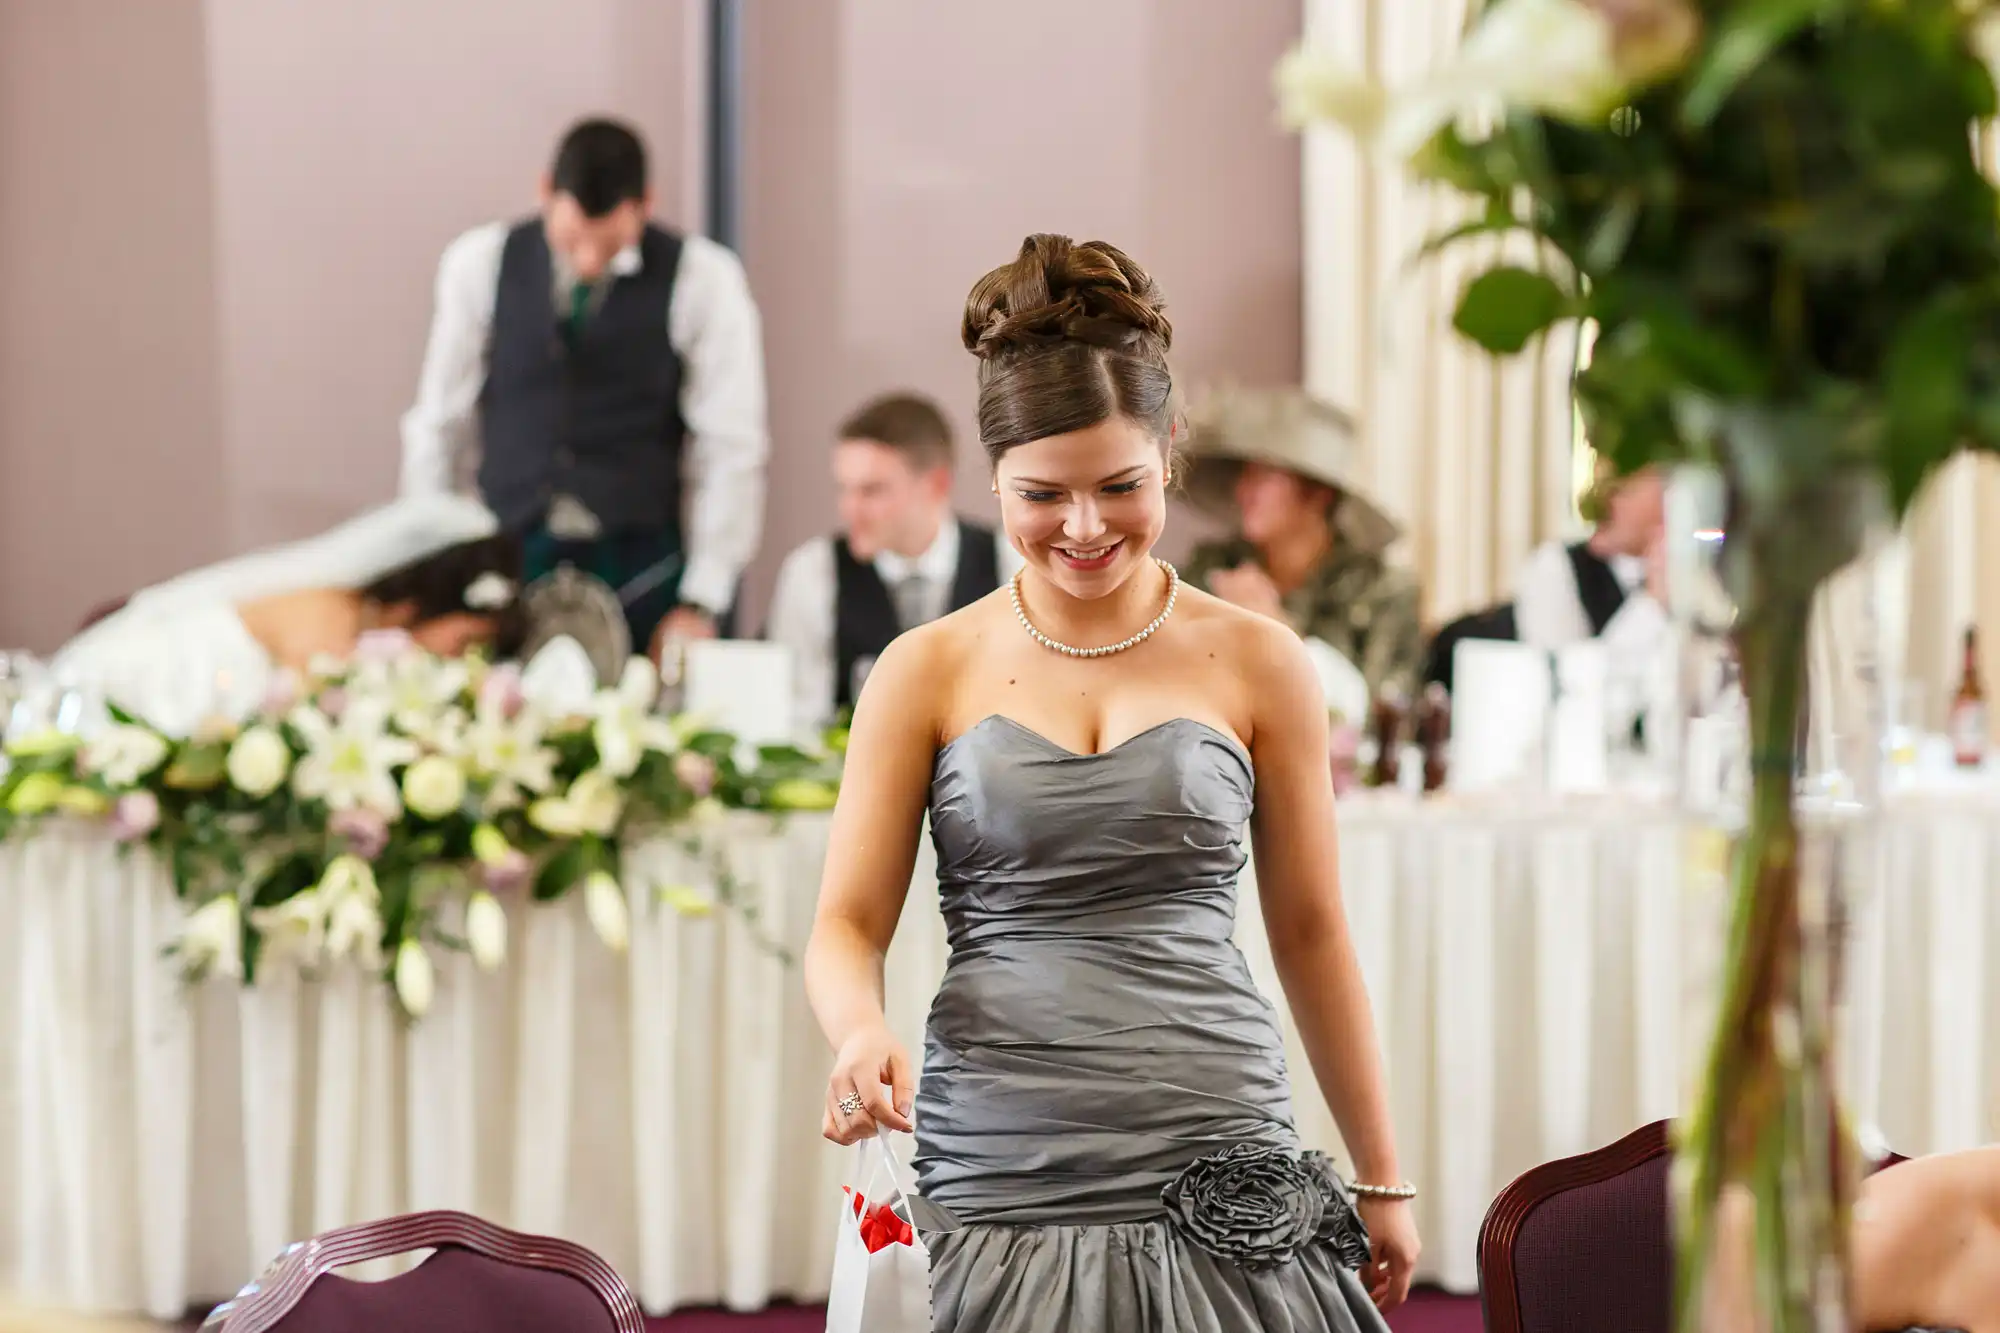 A woman in a gray dress smiles while walking at a wedding reception, with guests and tables in the background.